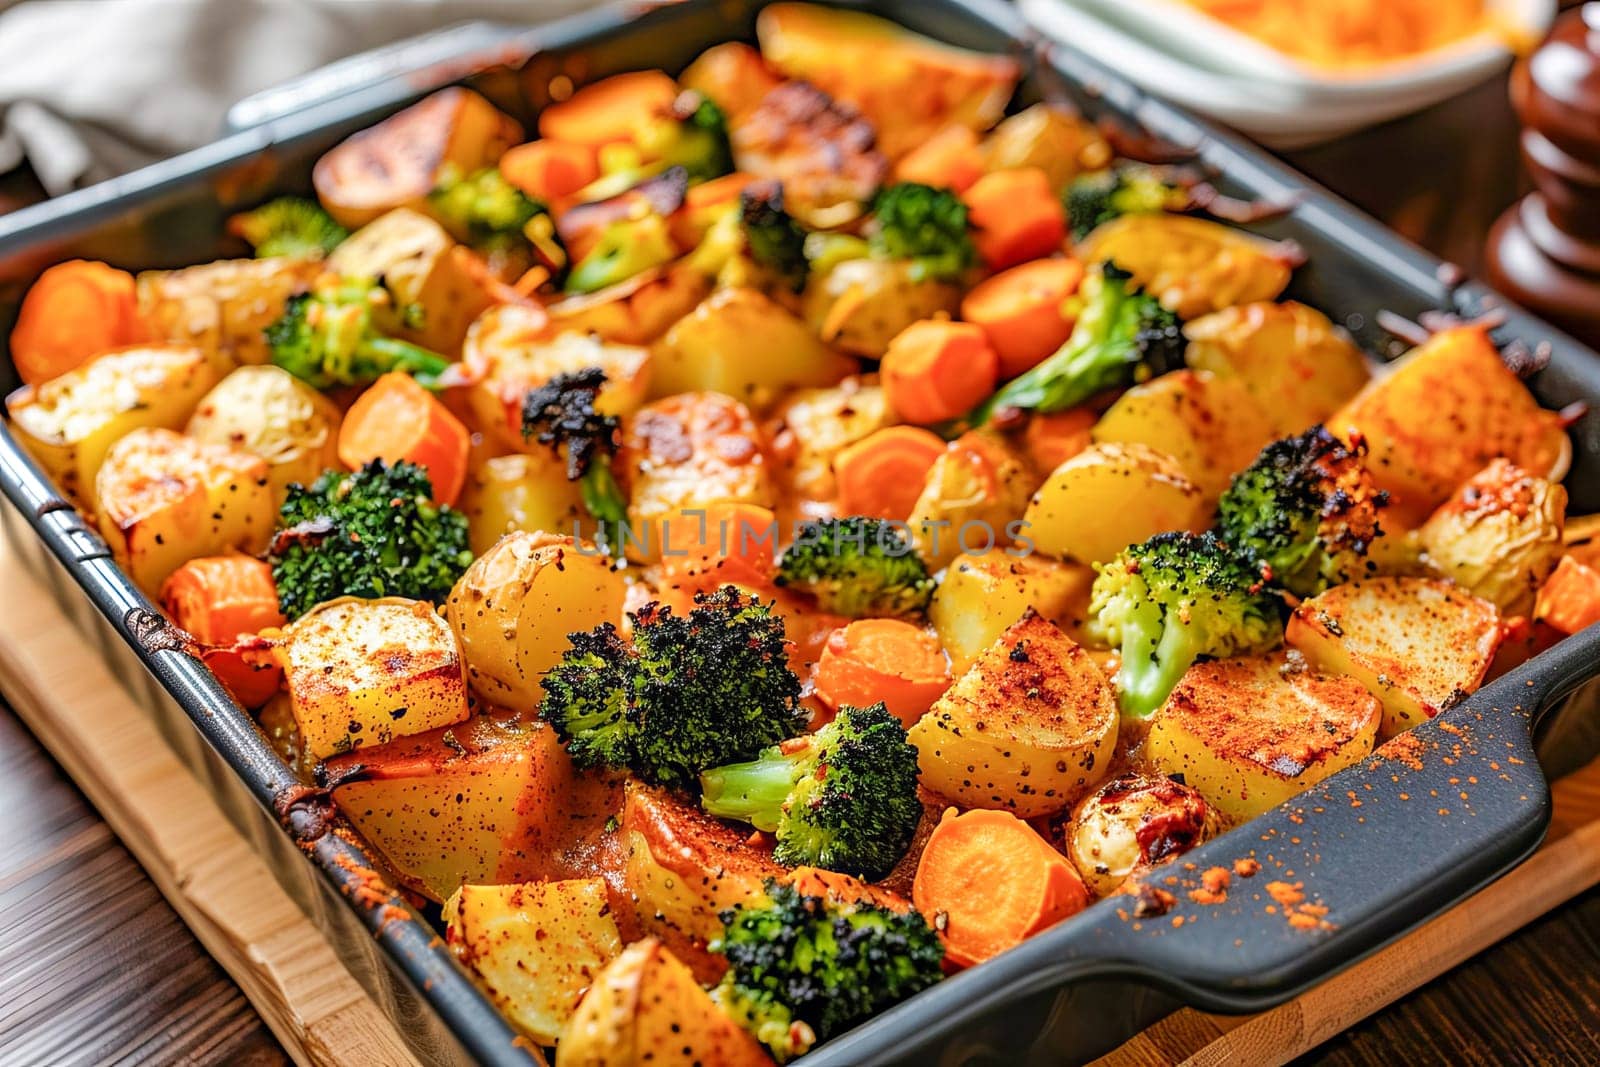 Homemade vegetable casserole of potatoes, carrots and broccoli with spices and cheese in a baking dish, on the table, in the kitchen. Healthy diet.